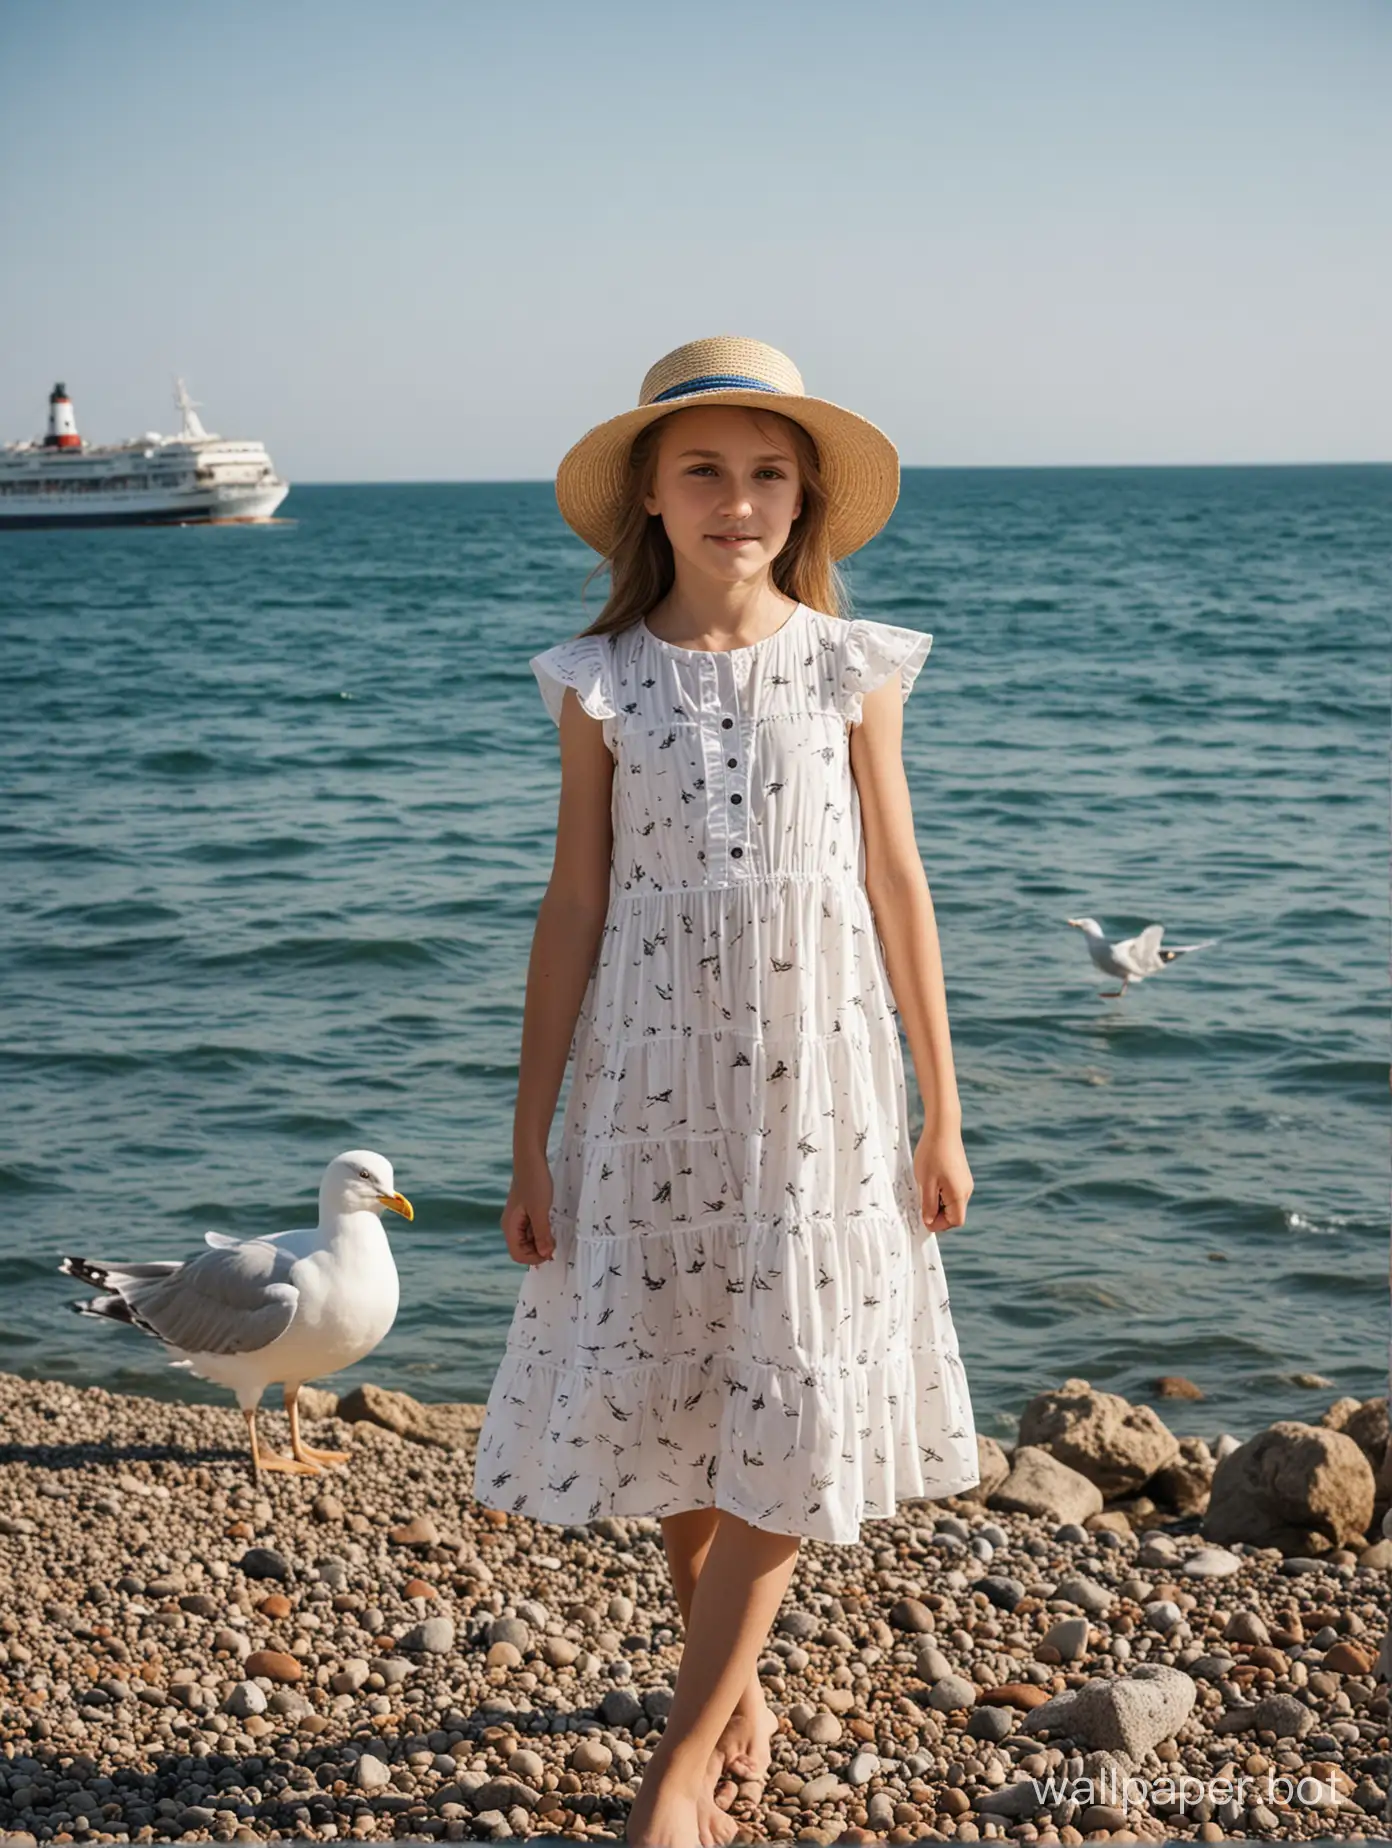 11YearOld-Girl-in-Transparent-Summer-Dress-with-Ship-and-Seagull-in-the-Black-Sea